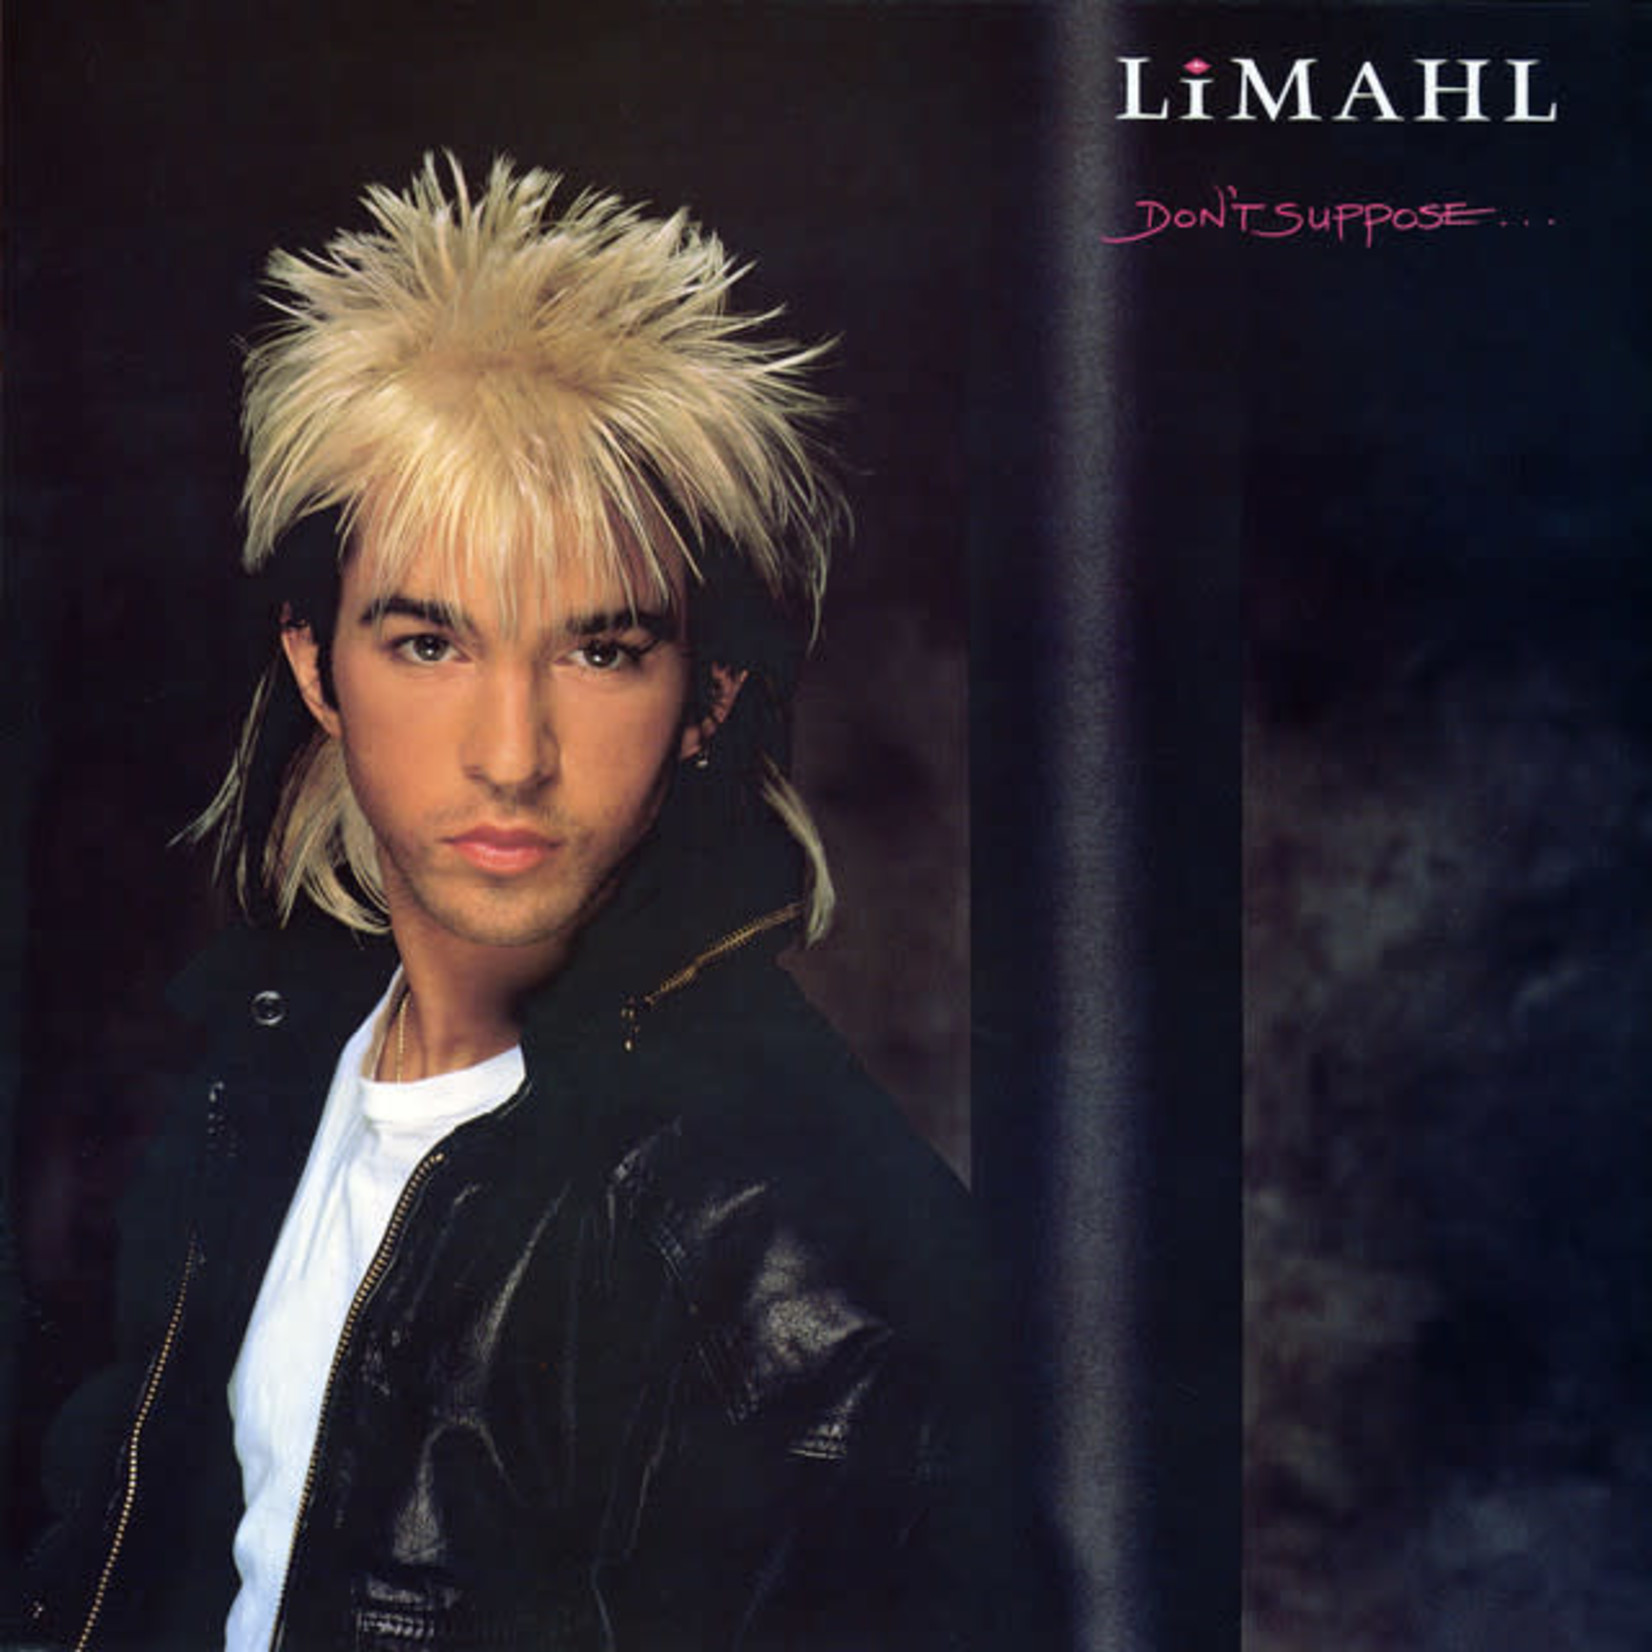 [Vintage] Limahl - Don't Suppose (LP, "Never Ending Story")